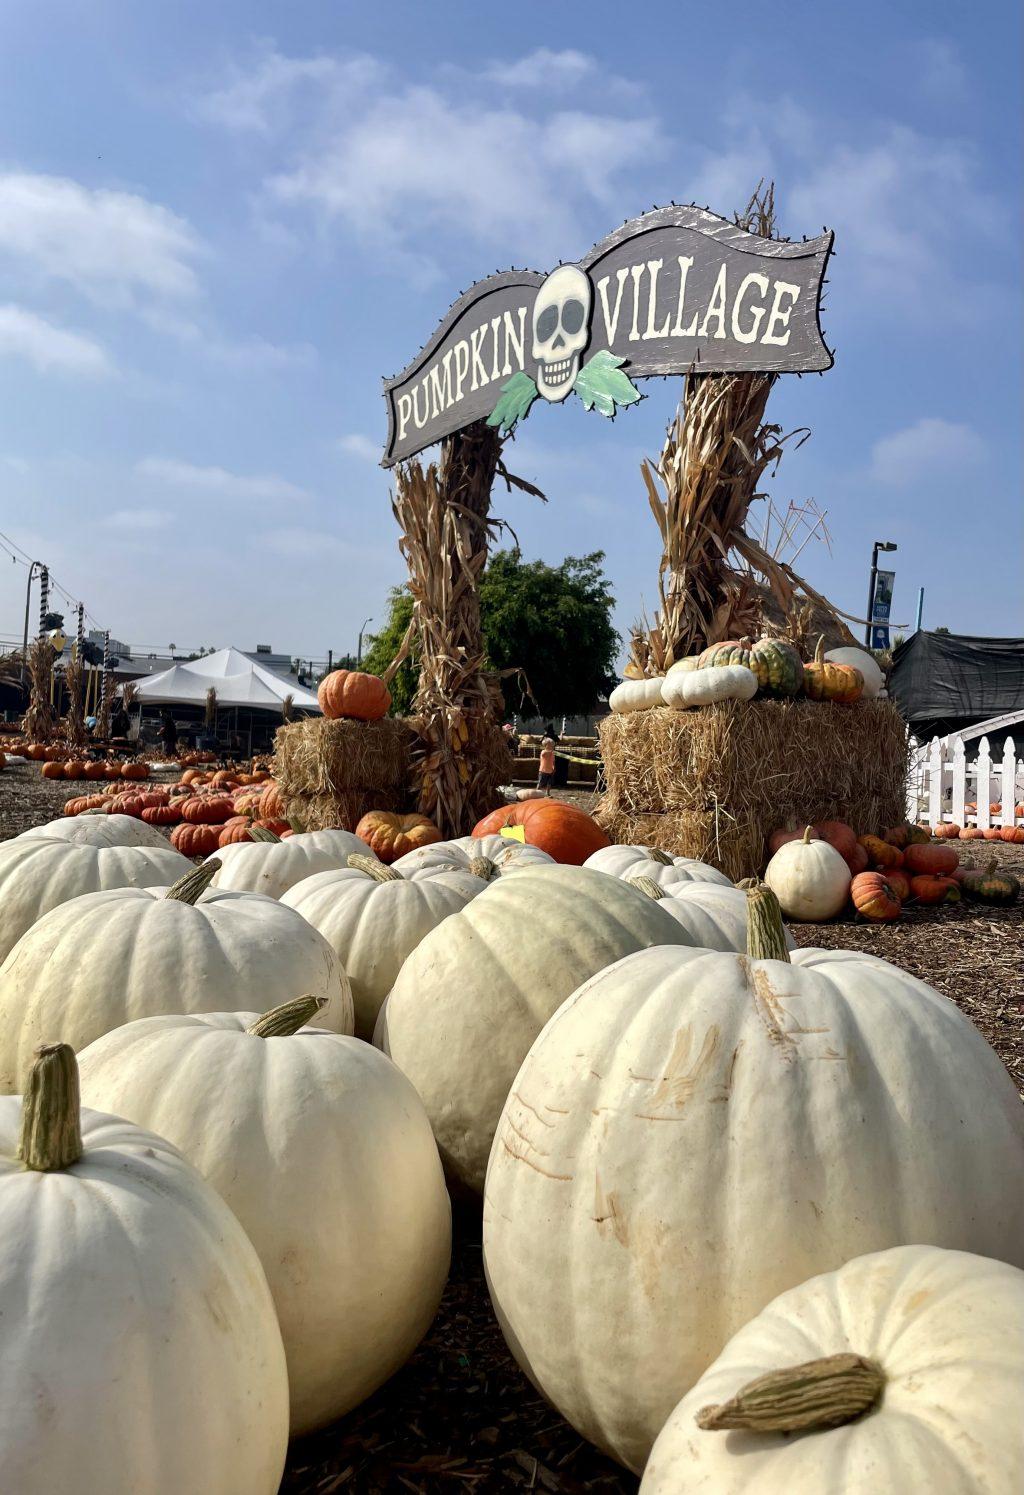 An assortment of pumpkins at Mr. Bones scatters the patch, complimenting the fall ambiance Oct. 7. The pumpkin and tipi villages provided a backdrop for fall photos, complete with spooky lights for a visit at dusk. Photo by Lauren Goldblum